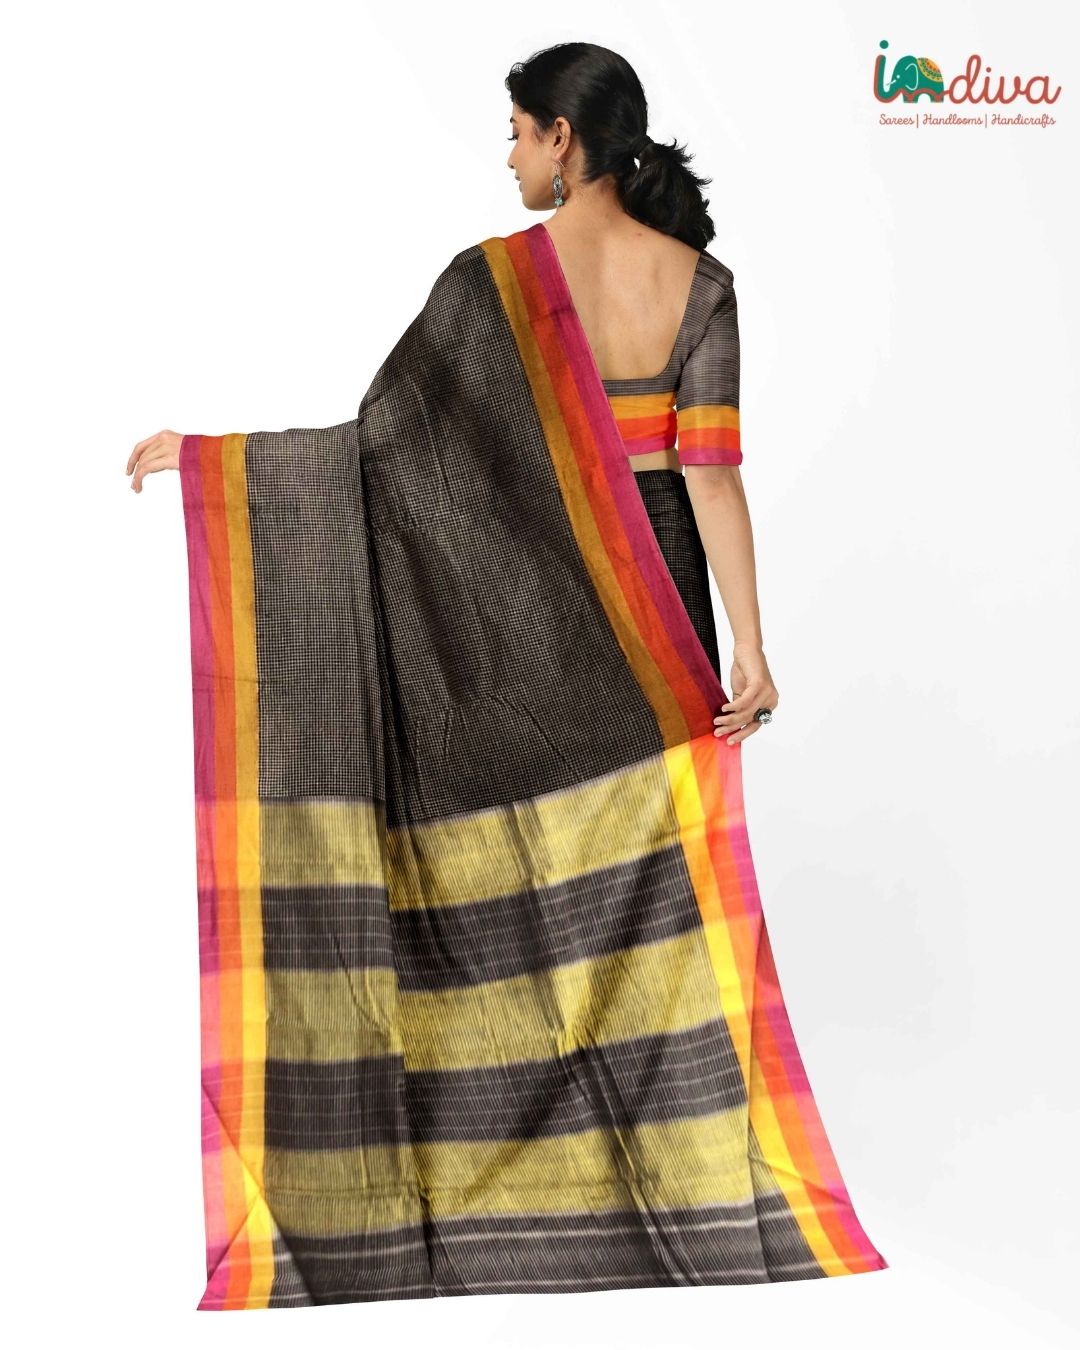 Indiva Handwoven Patteda Anchu Saree with 3 Colour Border